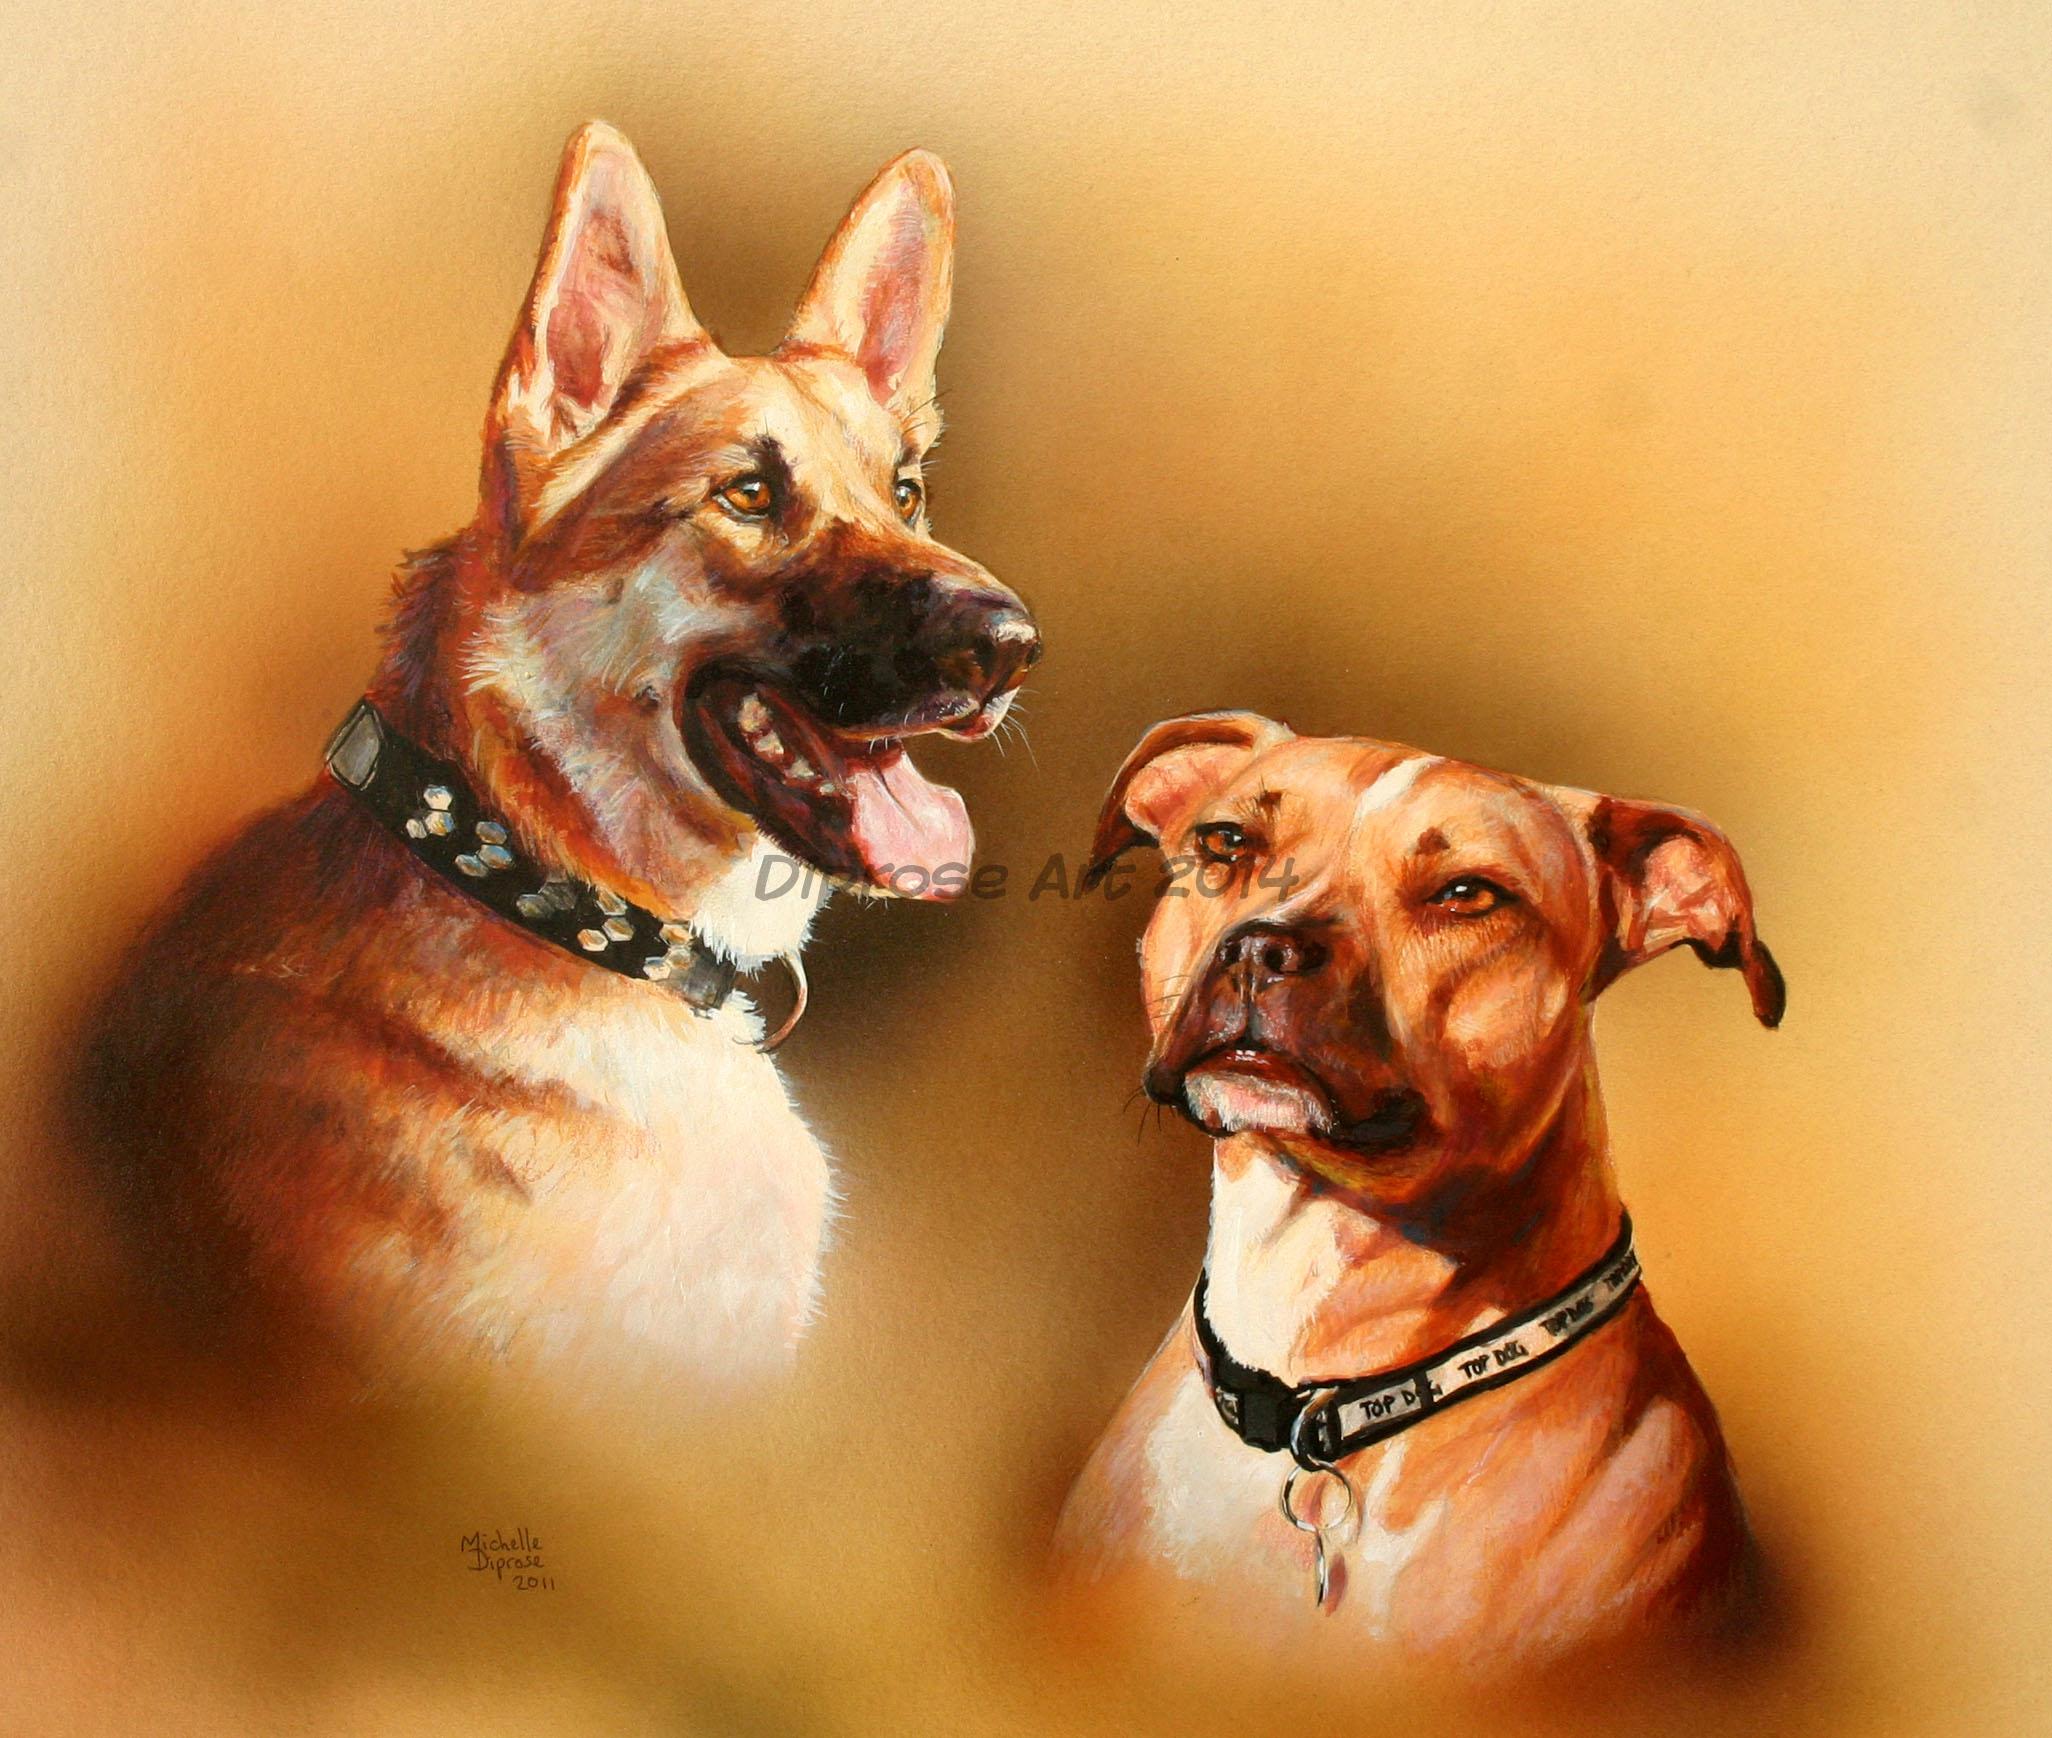 Acrylics on board - approx A3 - pet dog portrait - Zeus is a very handsome GSD and Mimi is a very loveable Staffie cross.